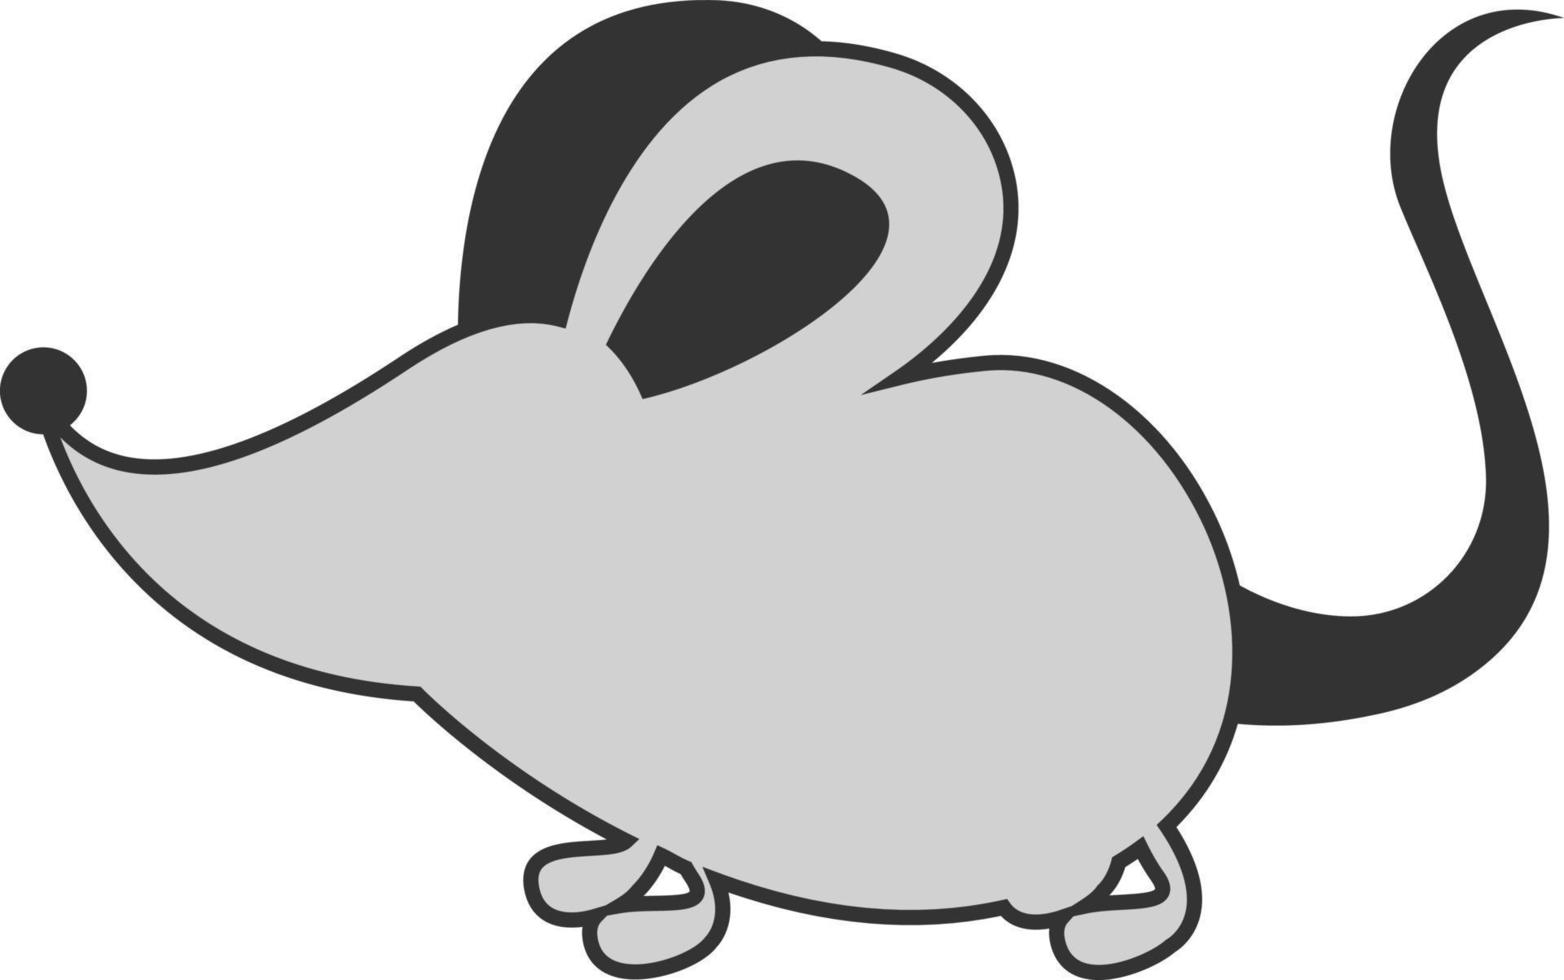 Grey mouse, illustration, vector on white background.